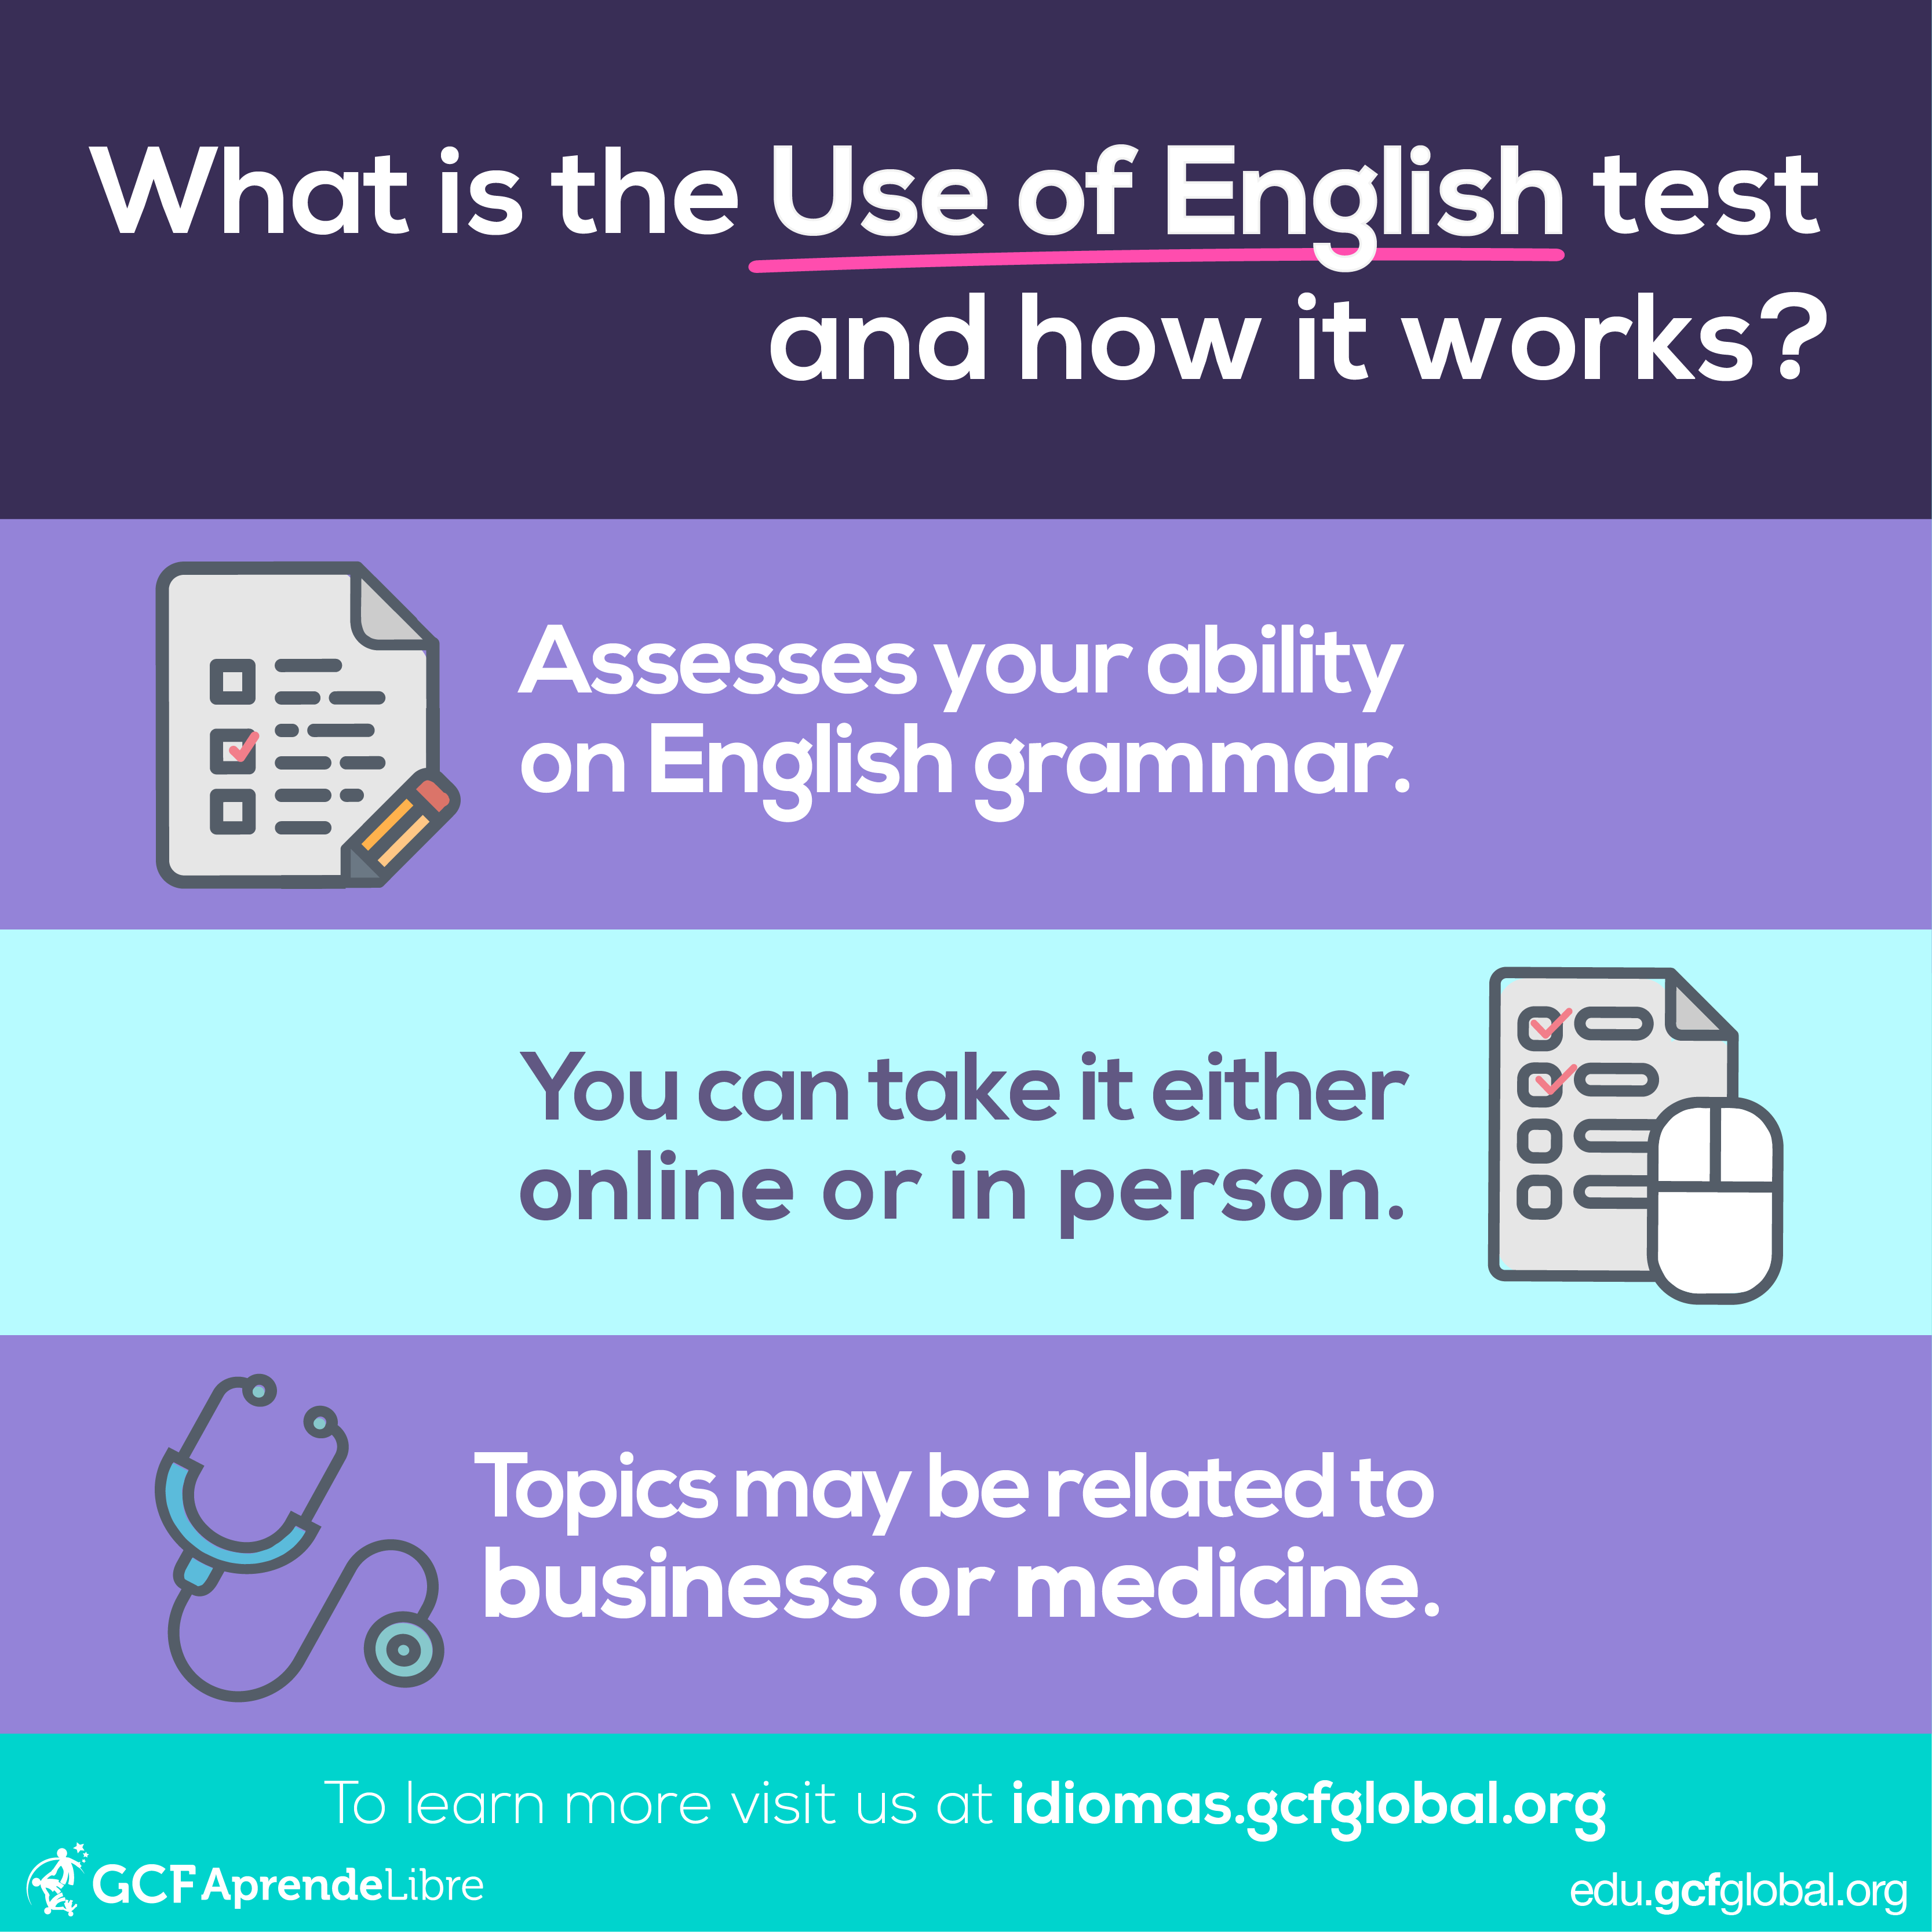 How Use of English test works